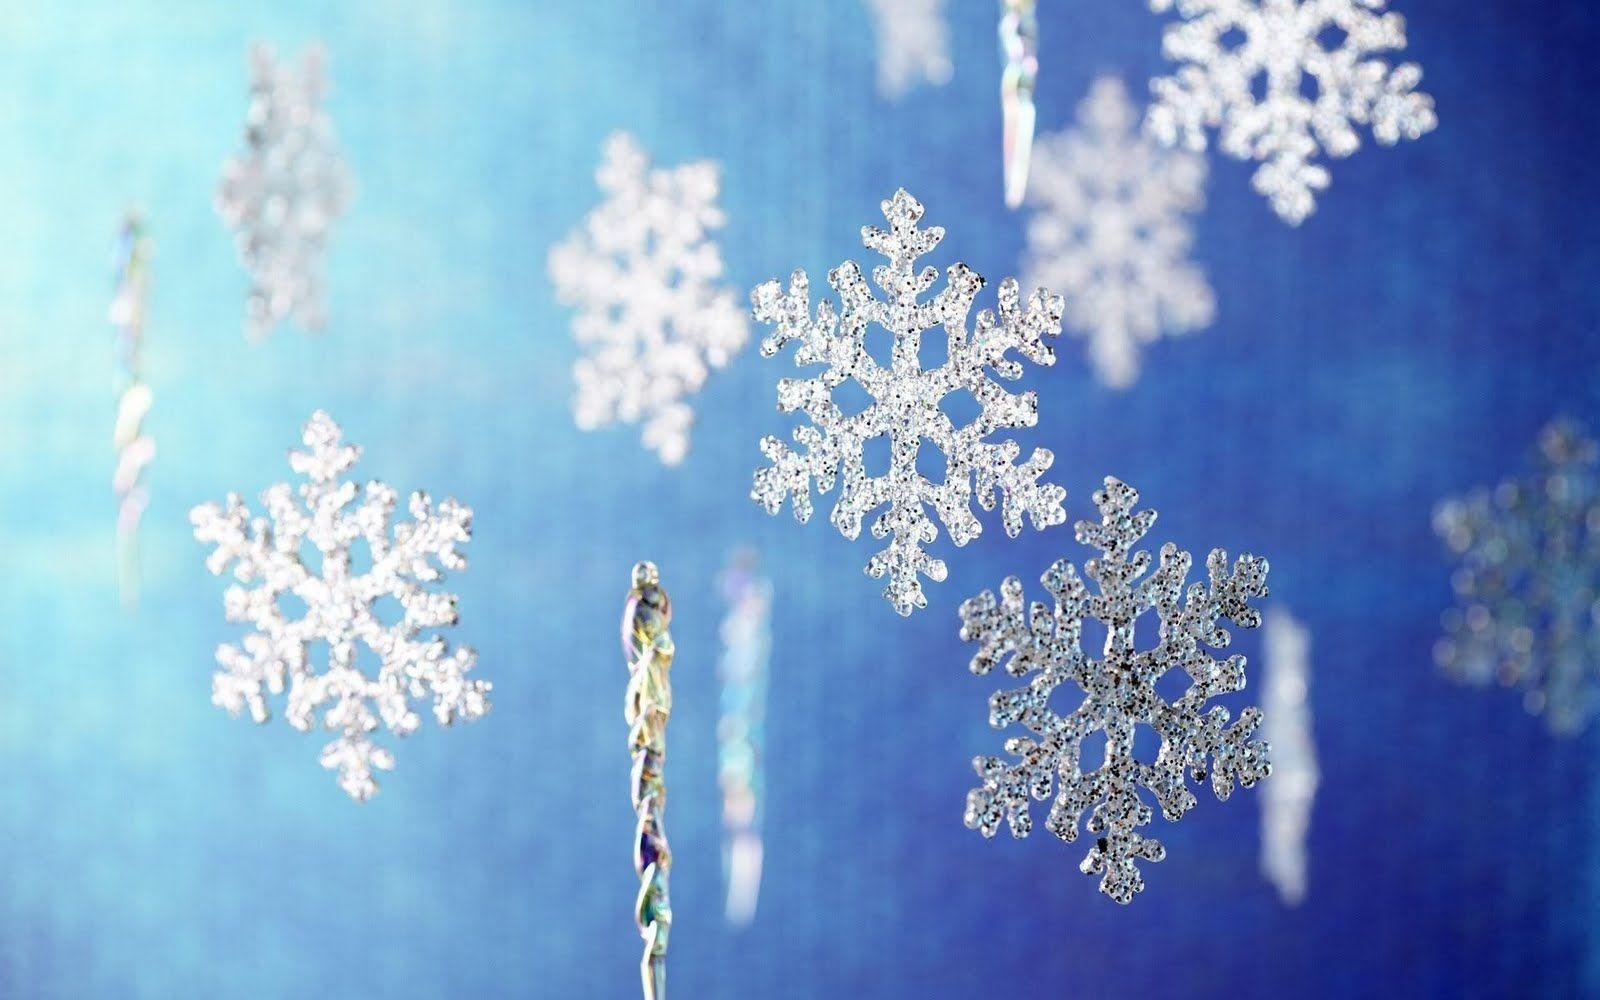 Christmas snowflakes clip art picture and background wallpaper